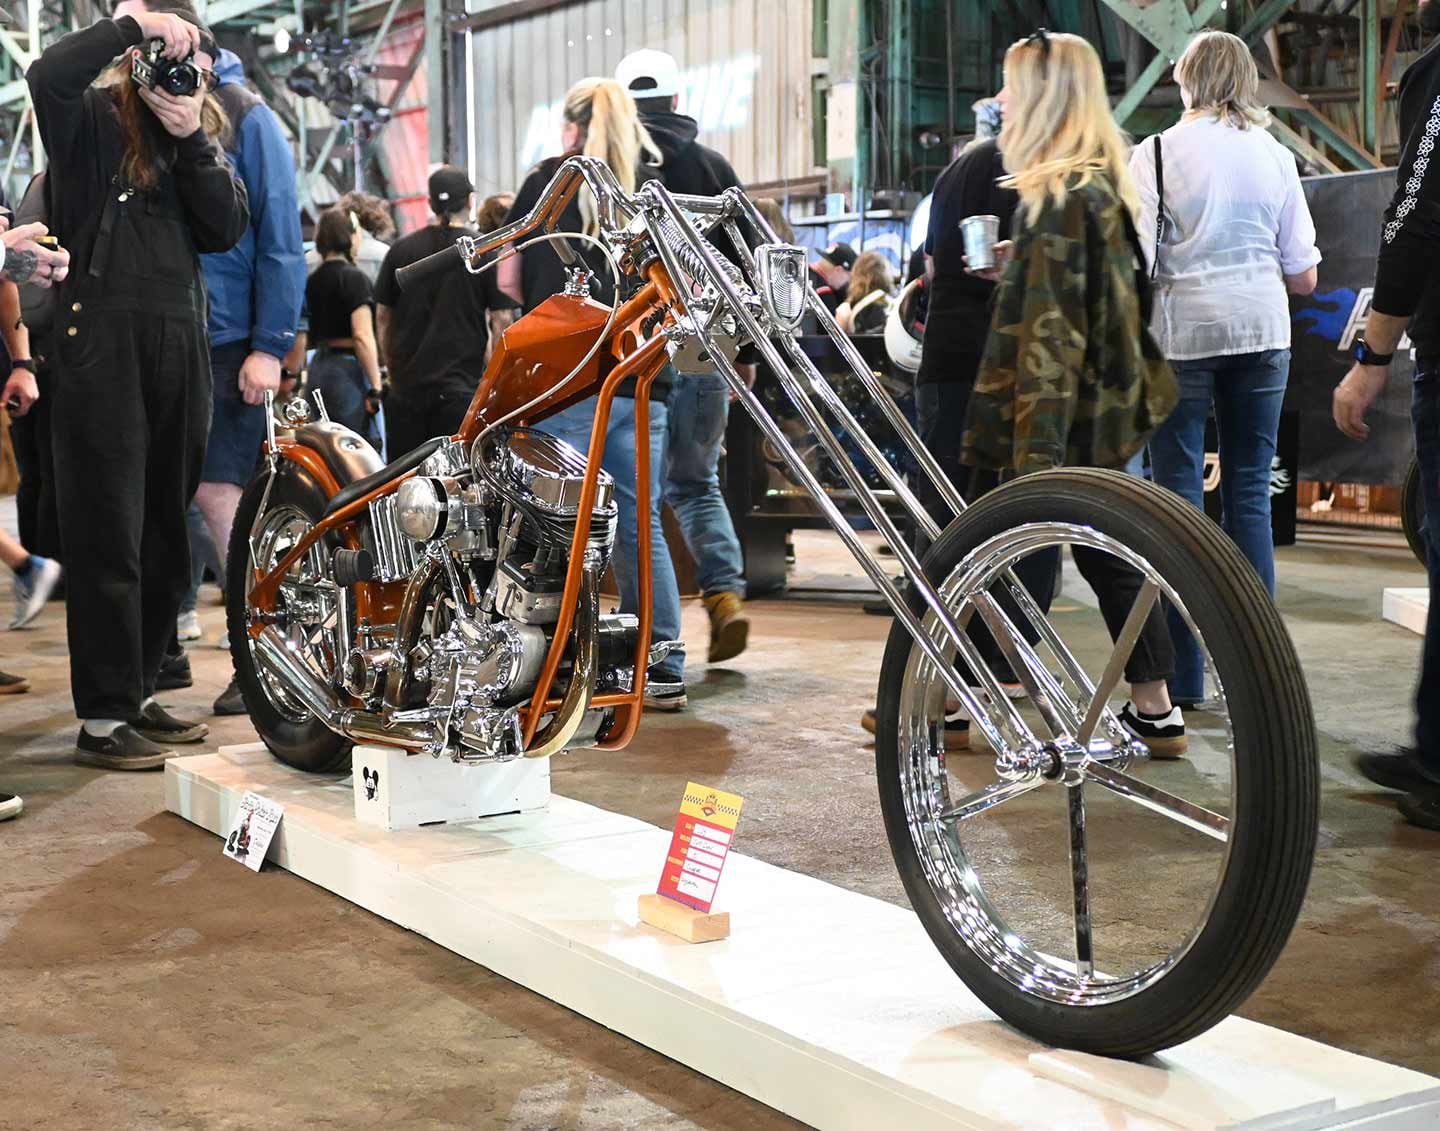 Jeff Gray’s wickedly raked ’51 chopper shows off a stretched-out girder fork.